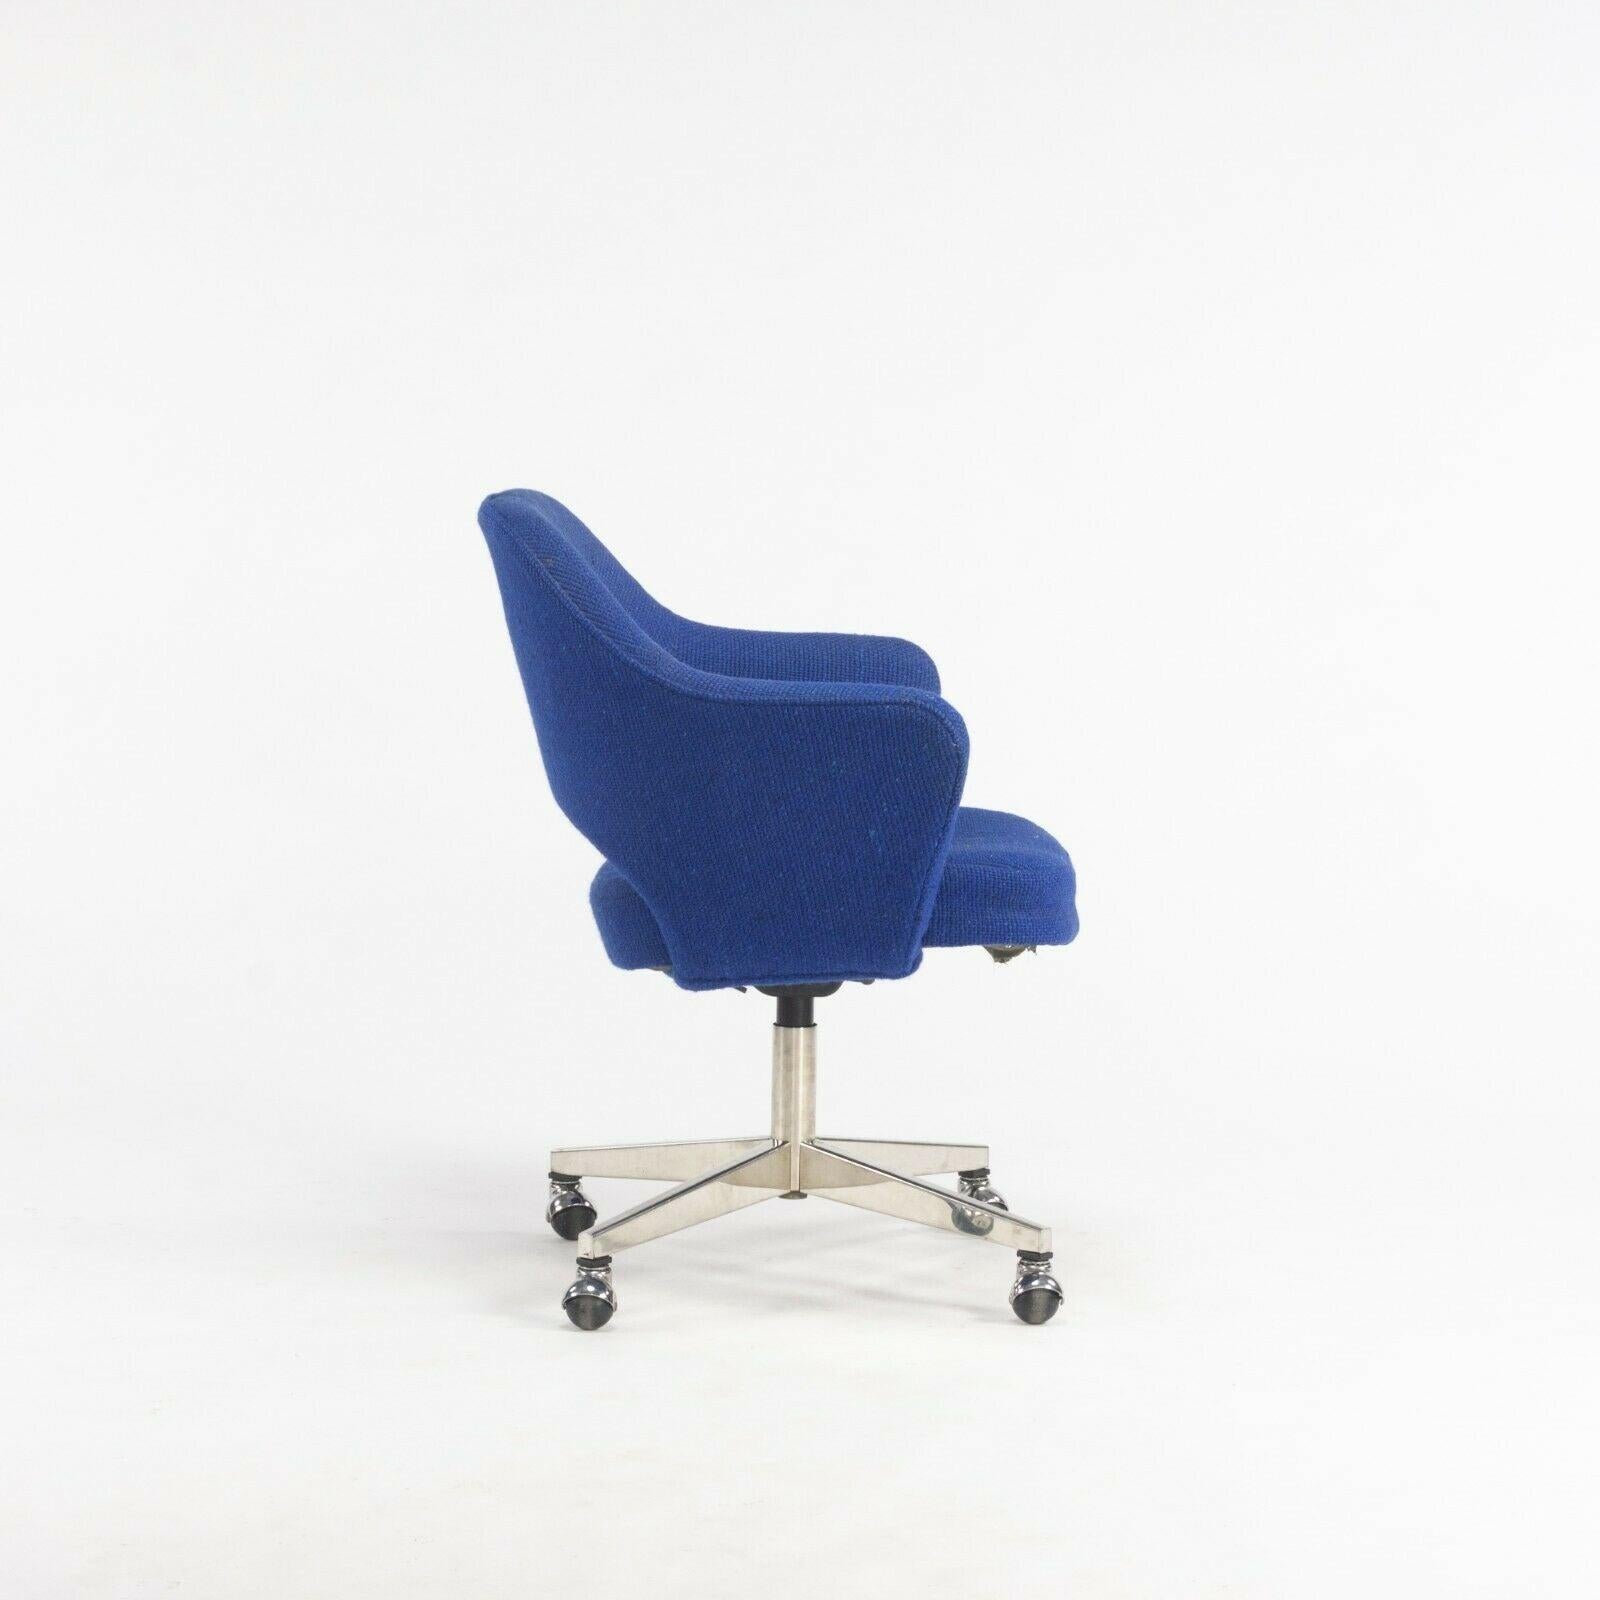 Modern 1974 Eero Saarinen for Knoll Rolling Executive Office Chair Original Blue Fabric For Sale